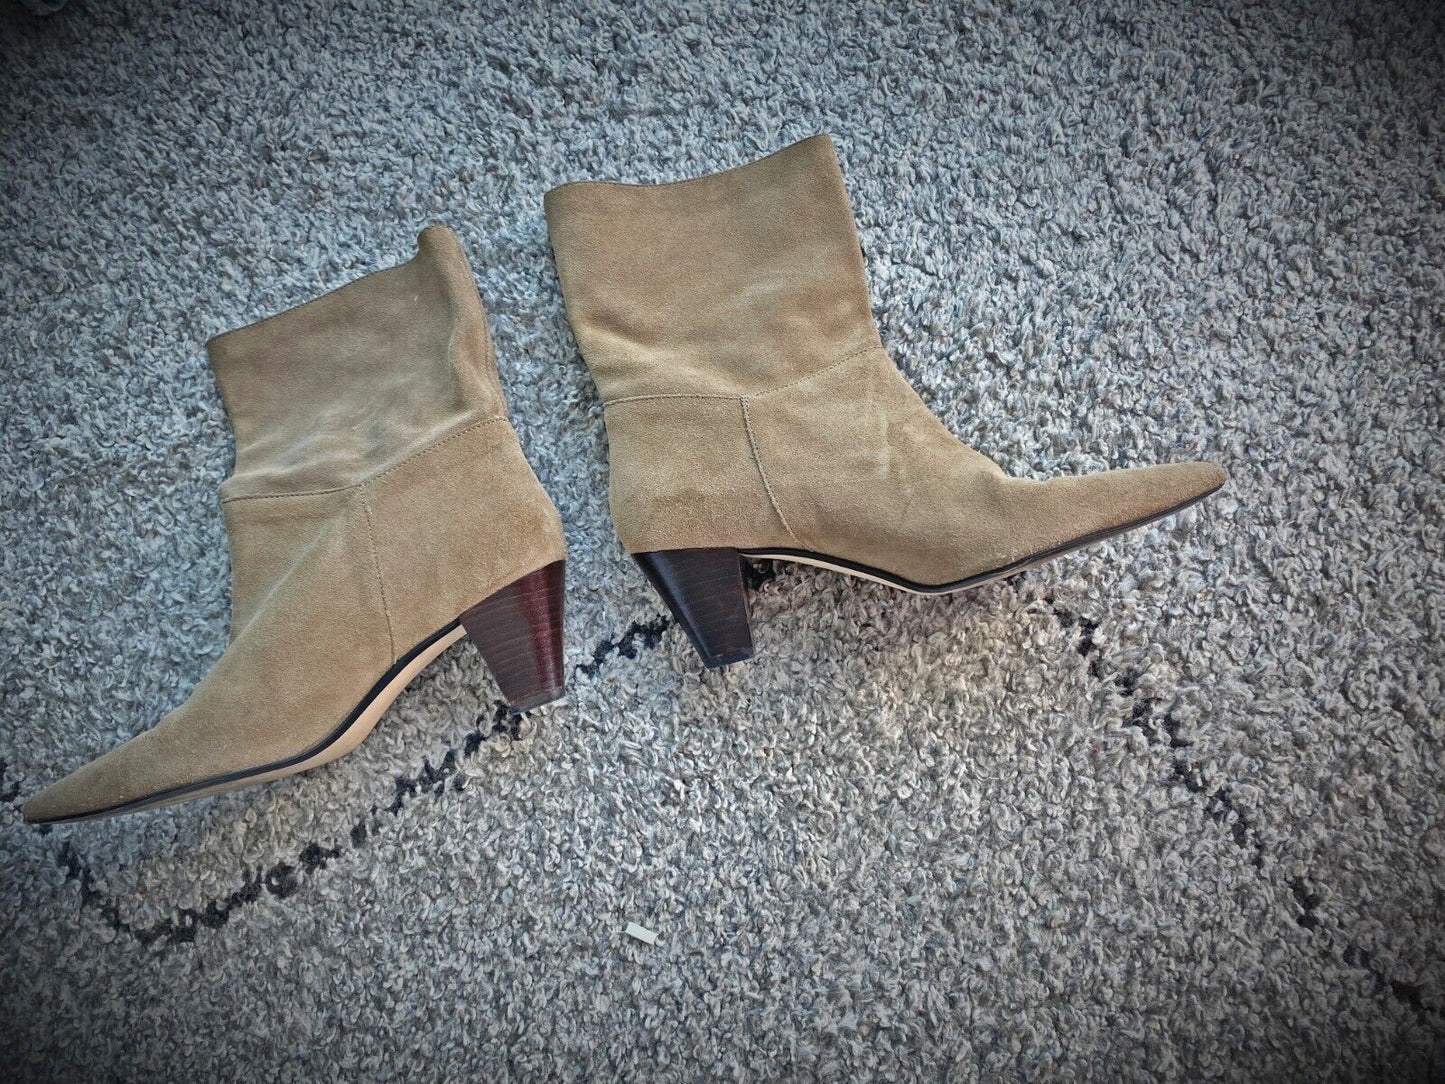 Zara Mid Calf Boots | Taupe/Brown, Sz 41, Genuine Suede, Pointed Toe, WORN ONCE